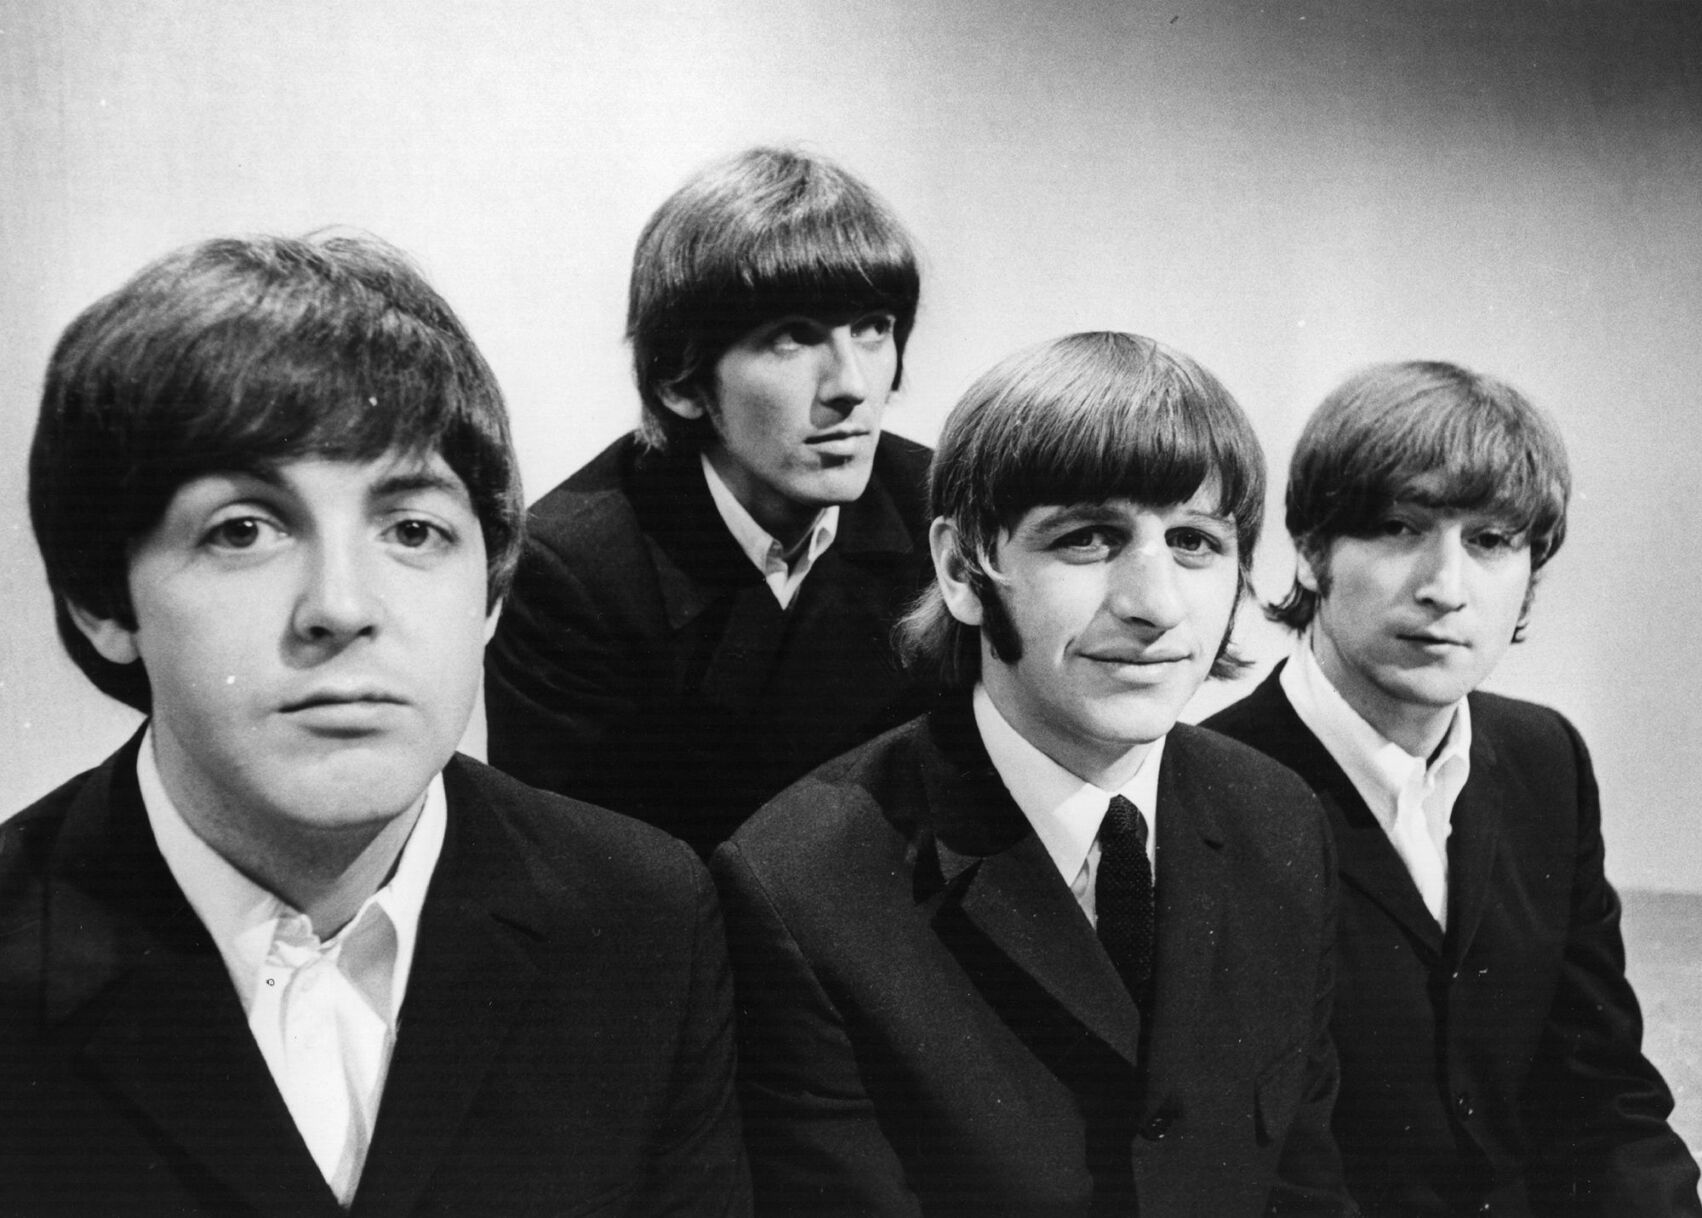 Paul McCartney says 'final' Beatles song coming thanks to